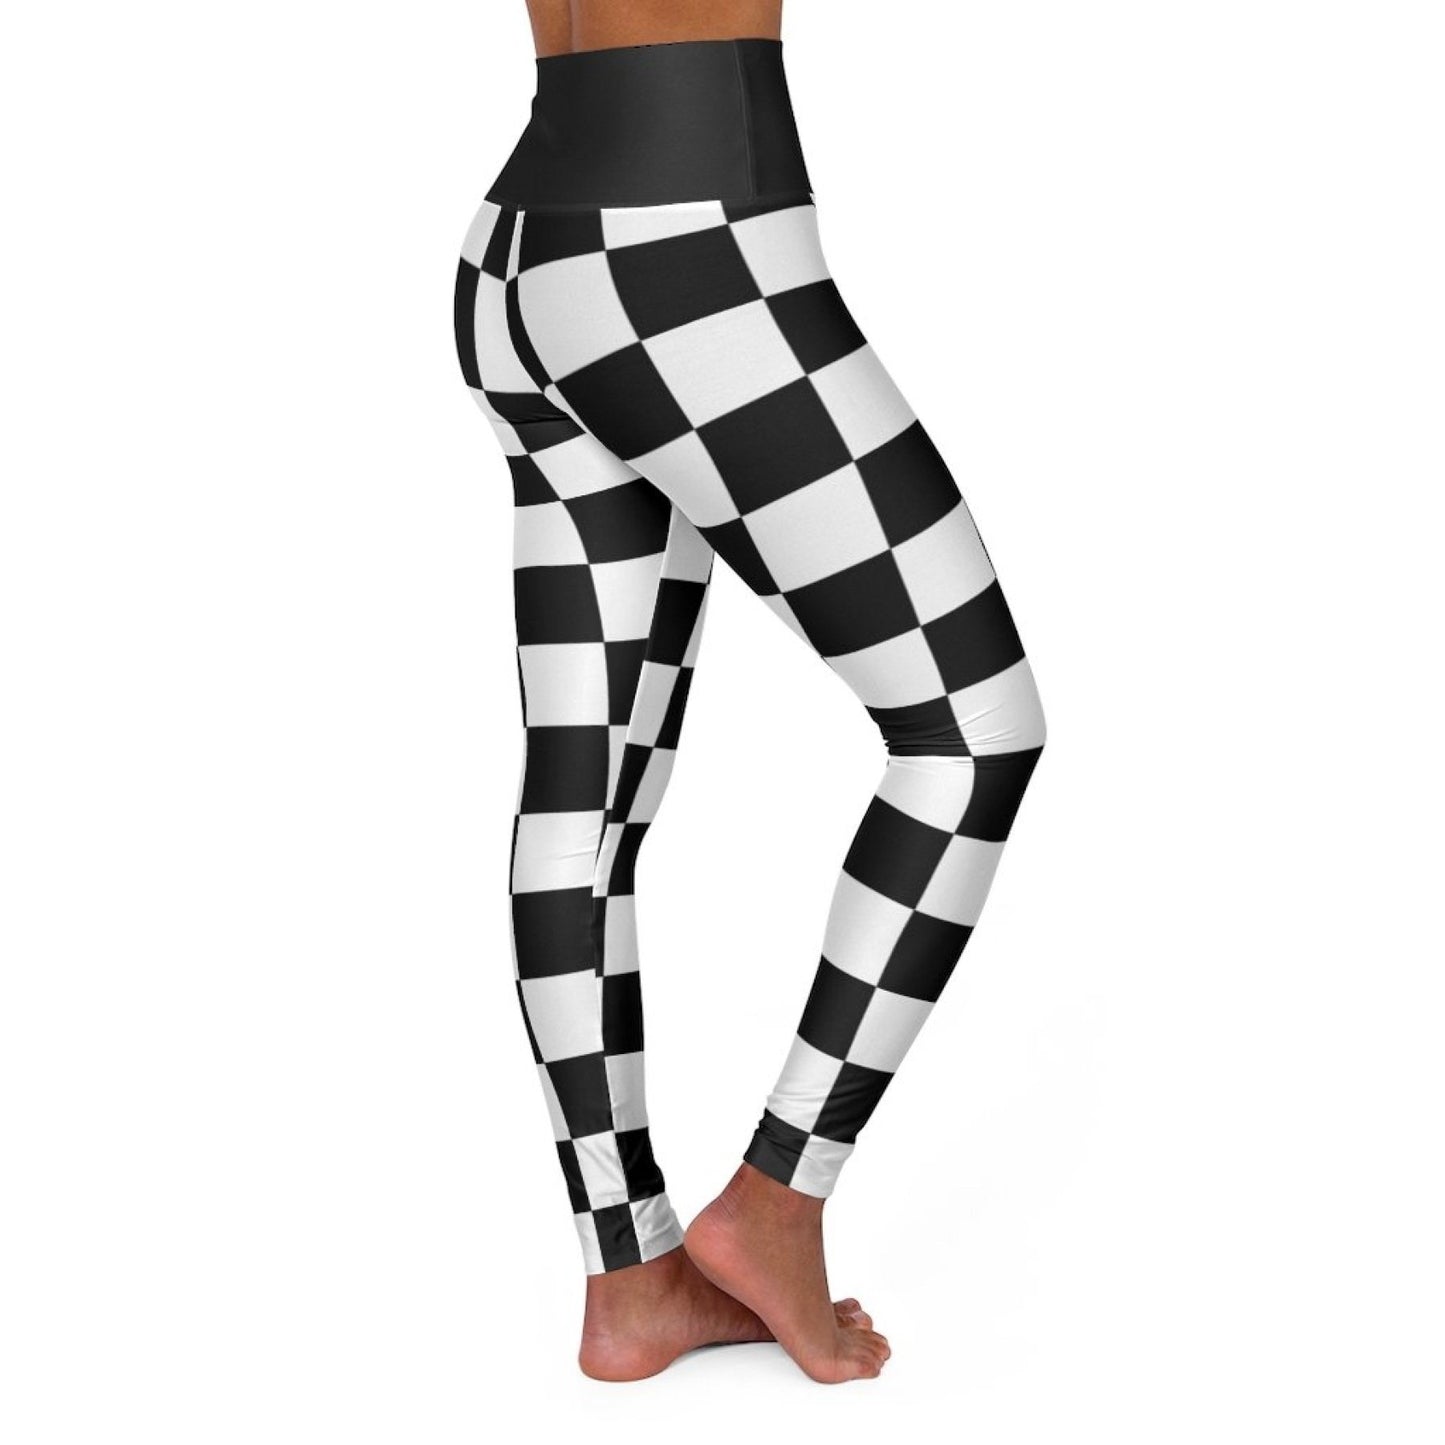 High Waisted Yoga Leggings, Black And White Checker Style Fitness Pants